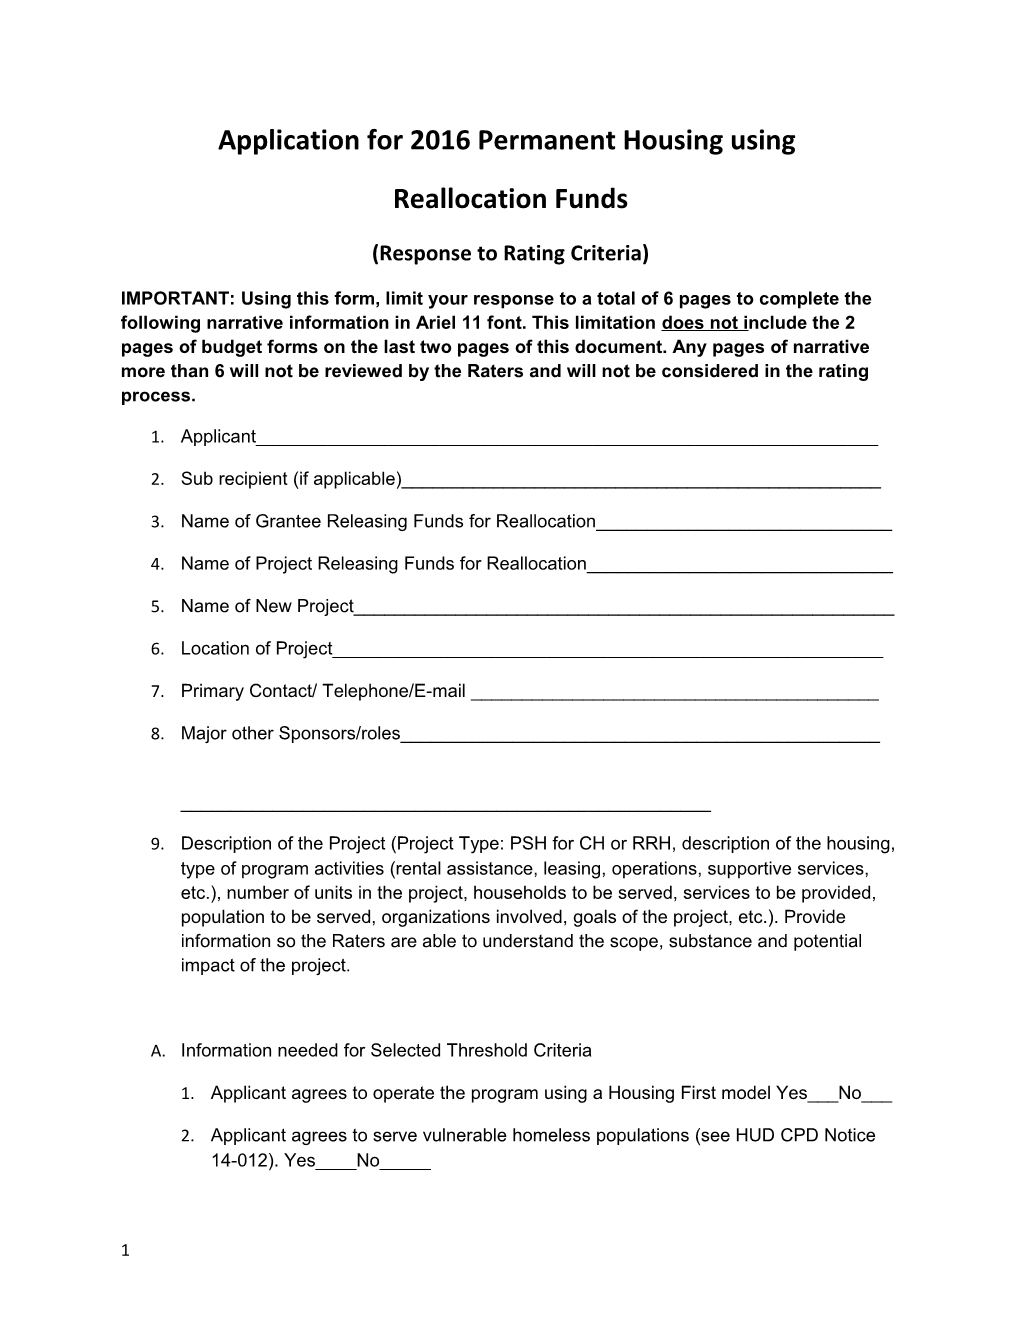 Application for 2016 Permanent Housing Using